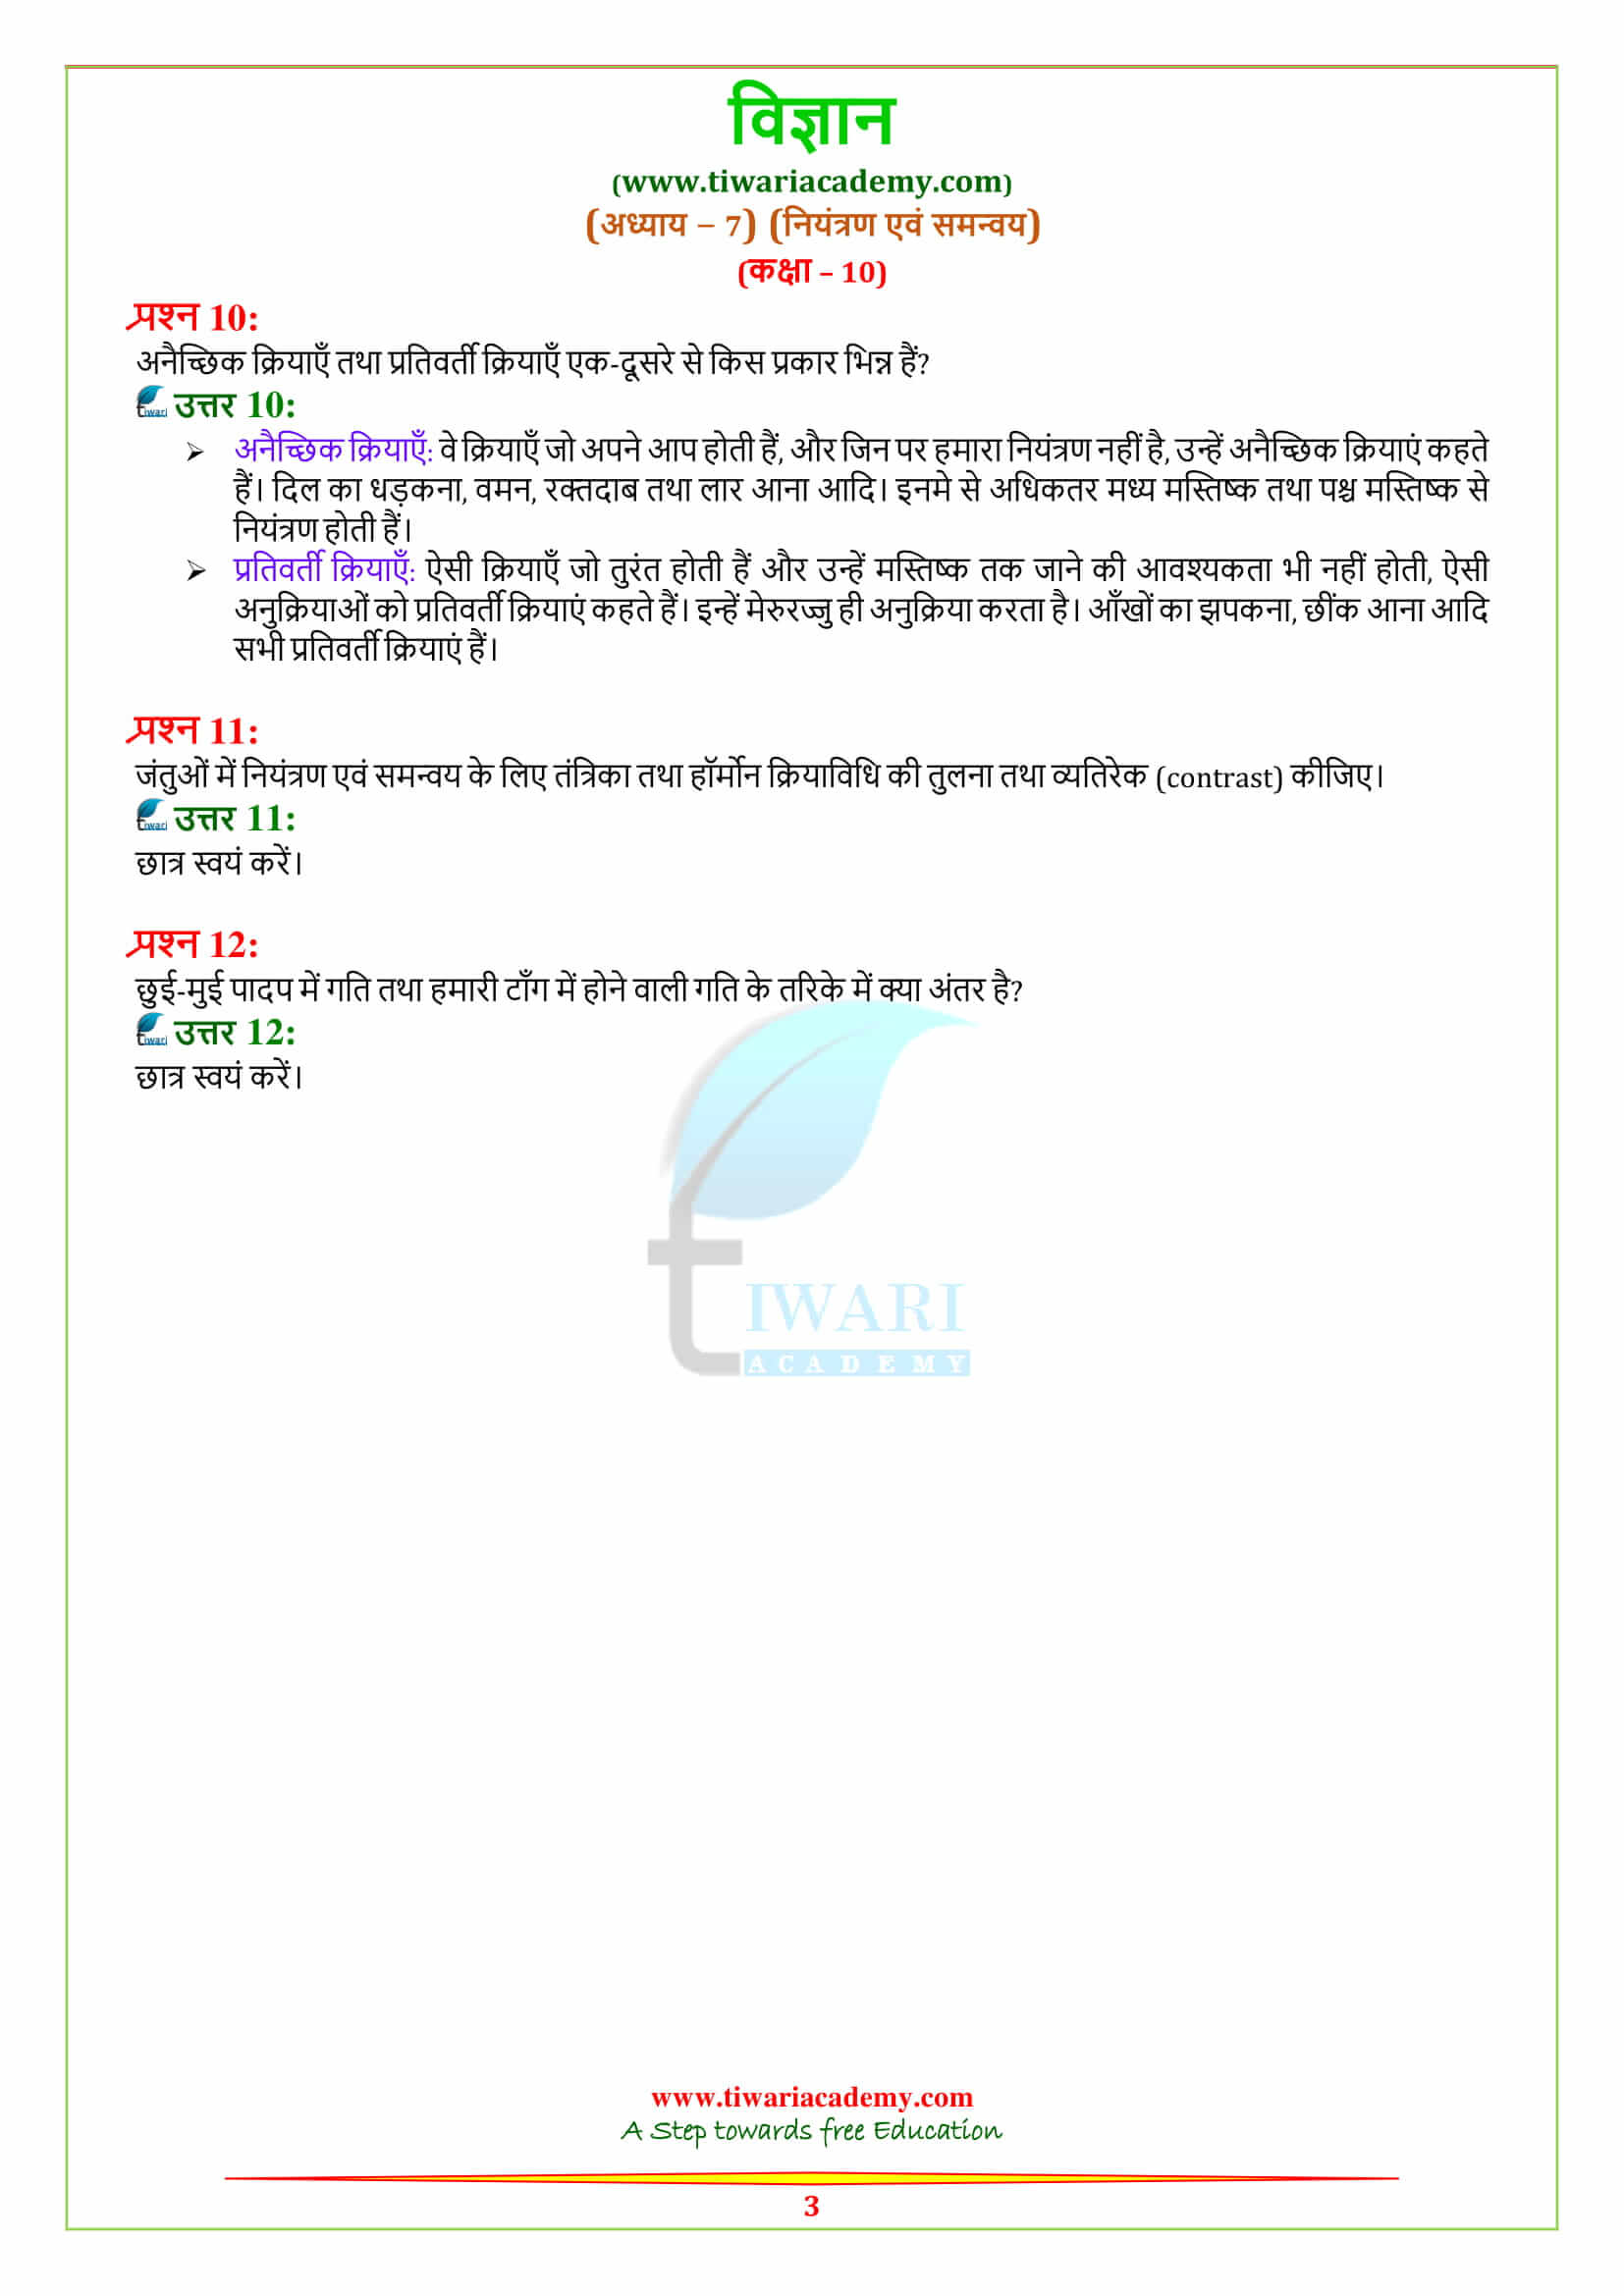 NCERT Solutions for Class 10 Science Chapter 7